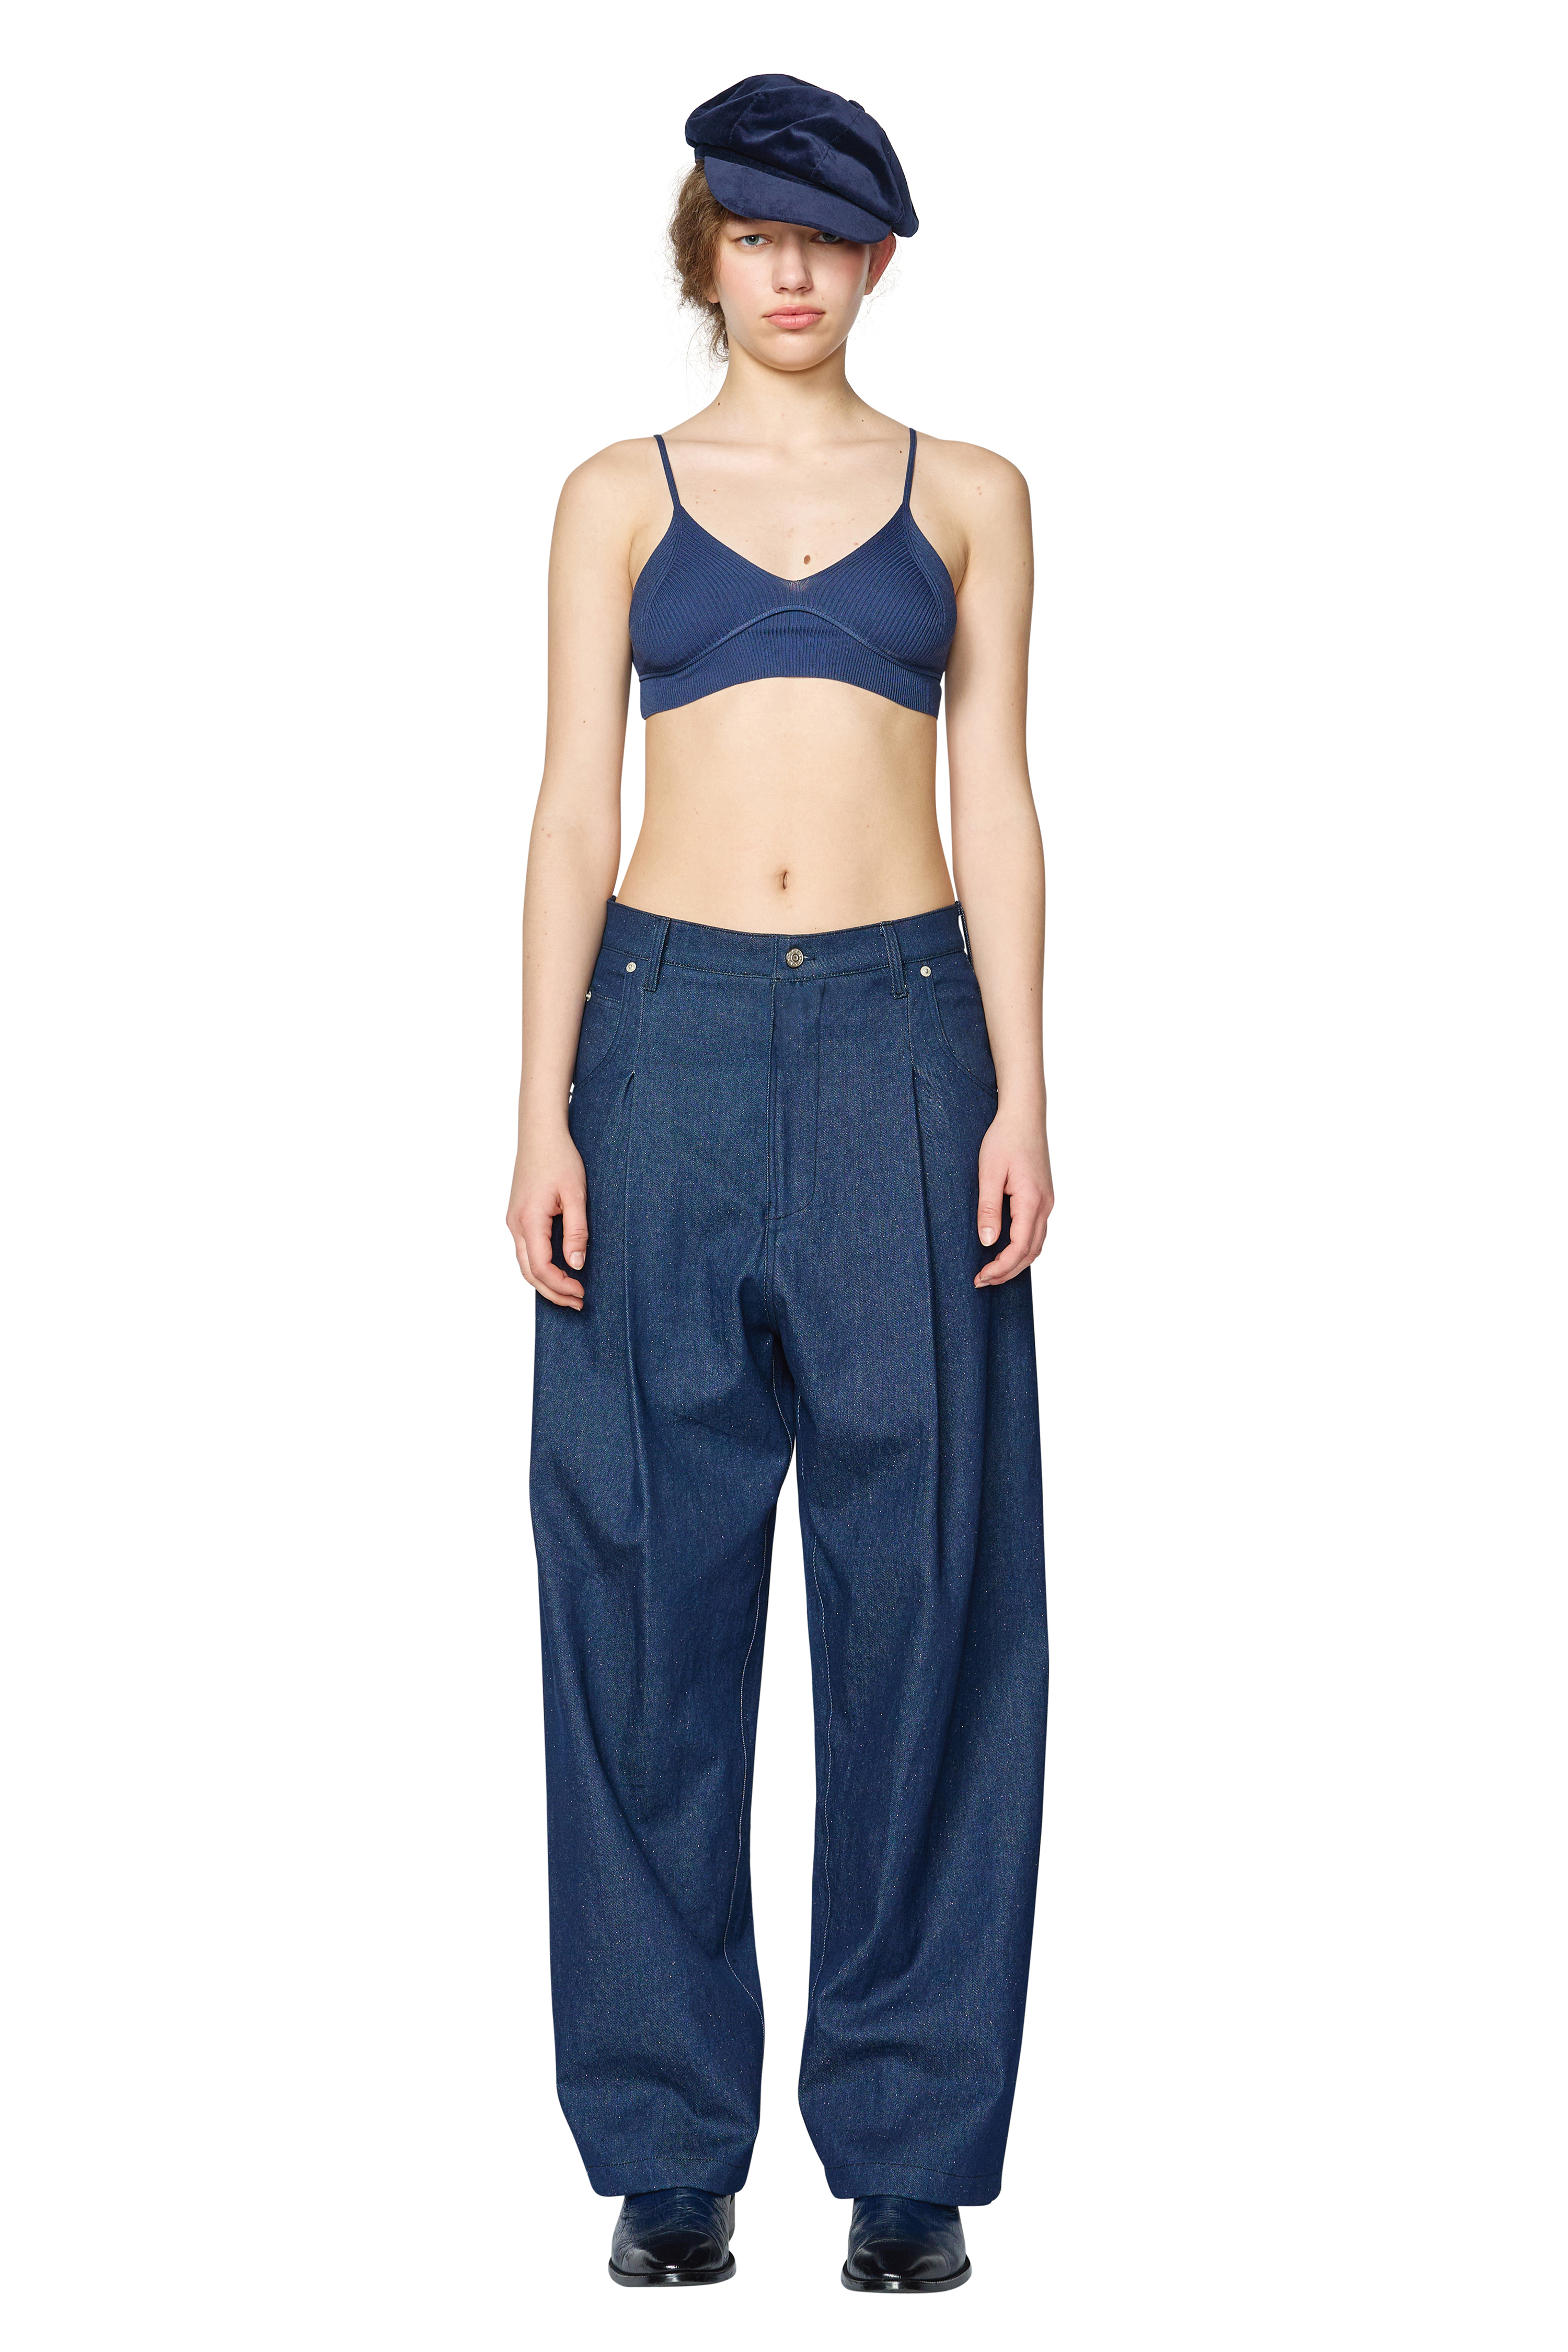 [ Delivery from 5/10 ] BLUE GLITTERY TUCKED DENIM TROUSERS